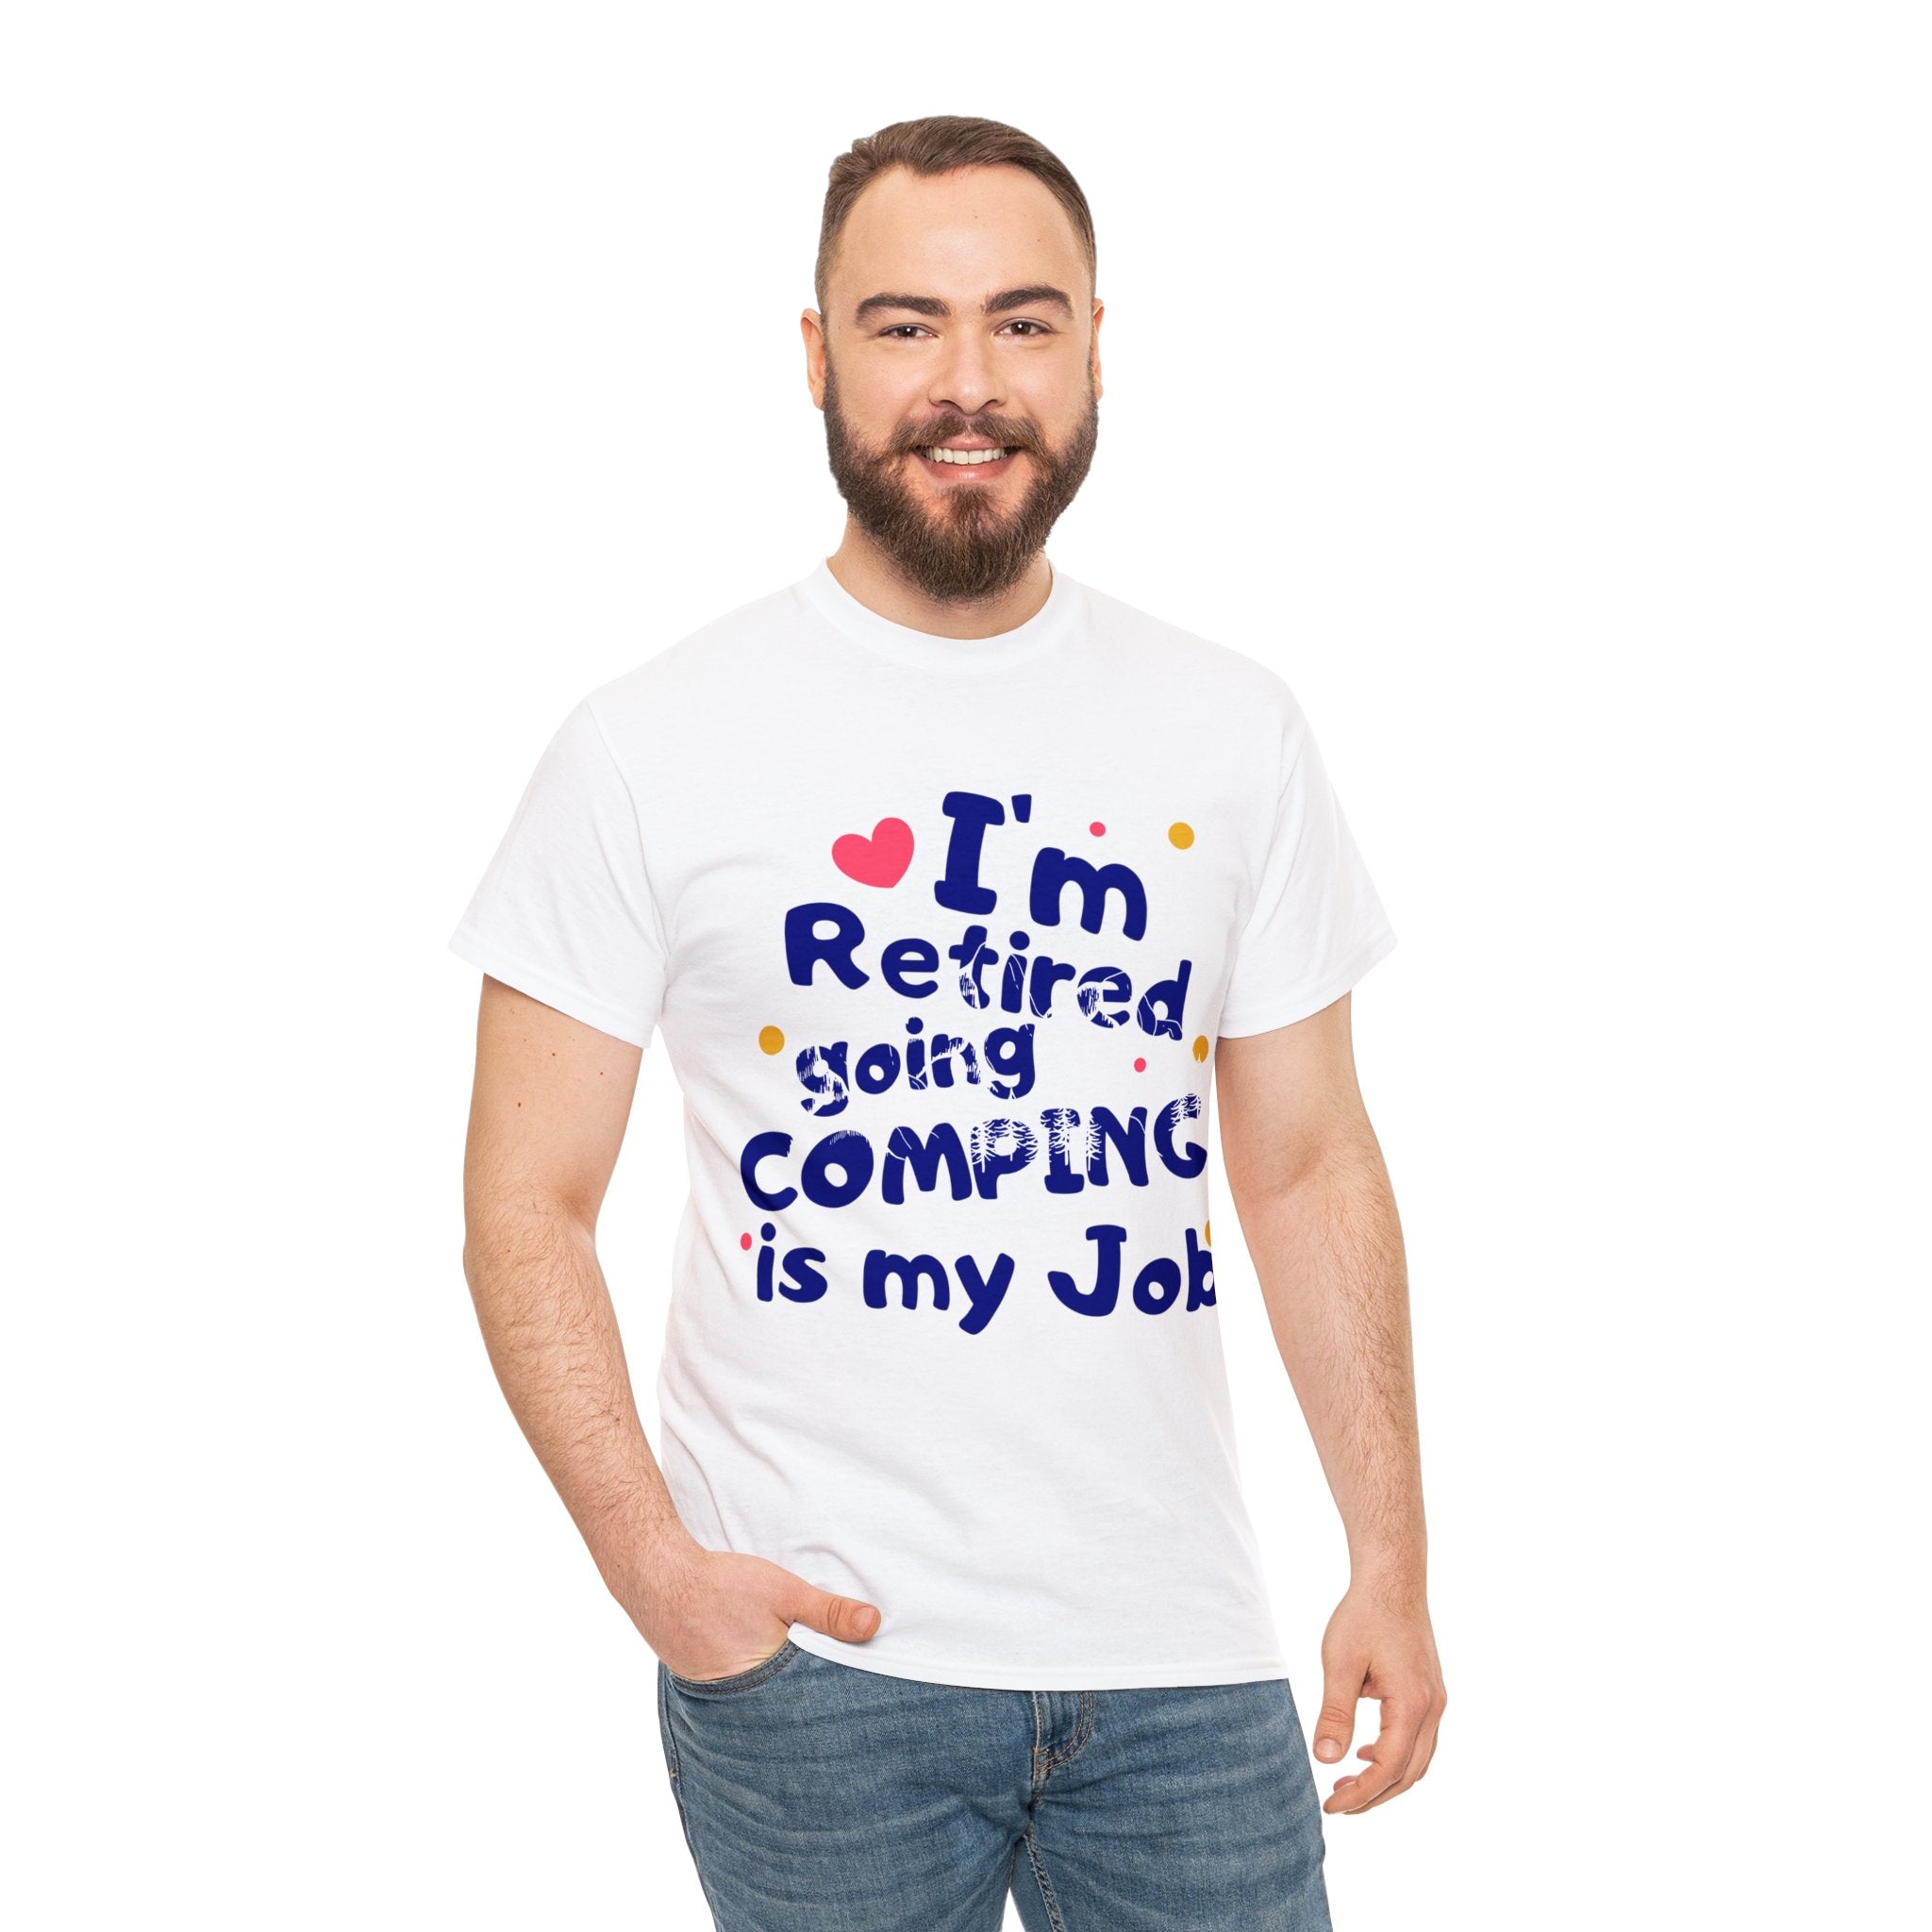 I'm Retired Going Camping Is My Job T-Shirt